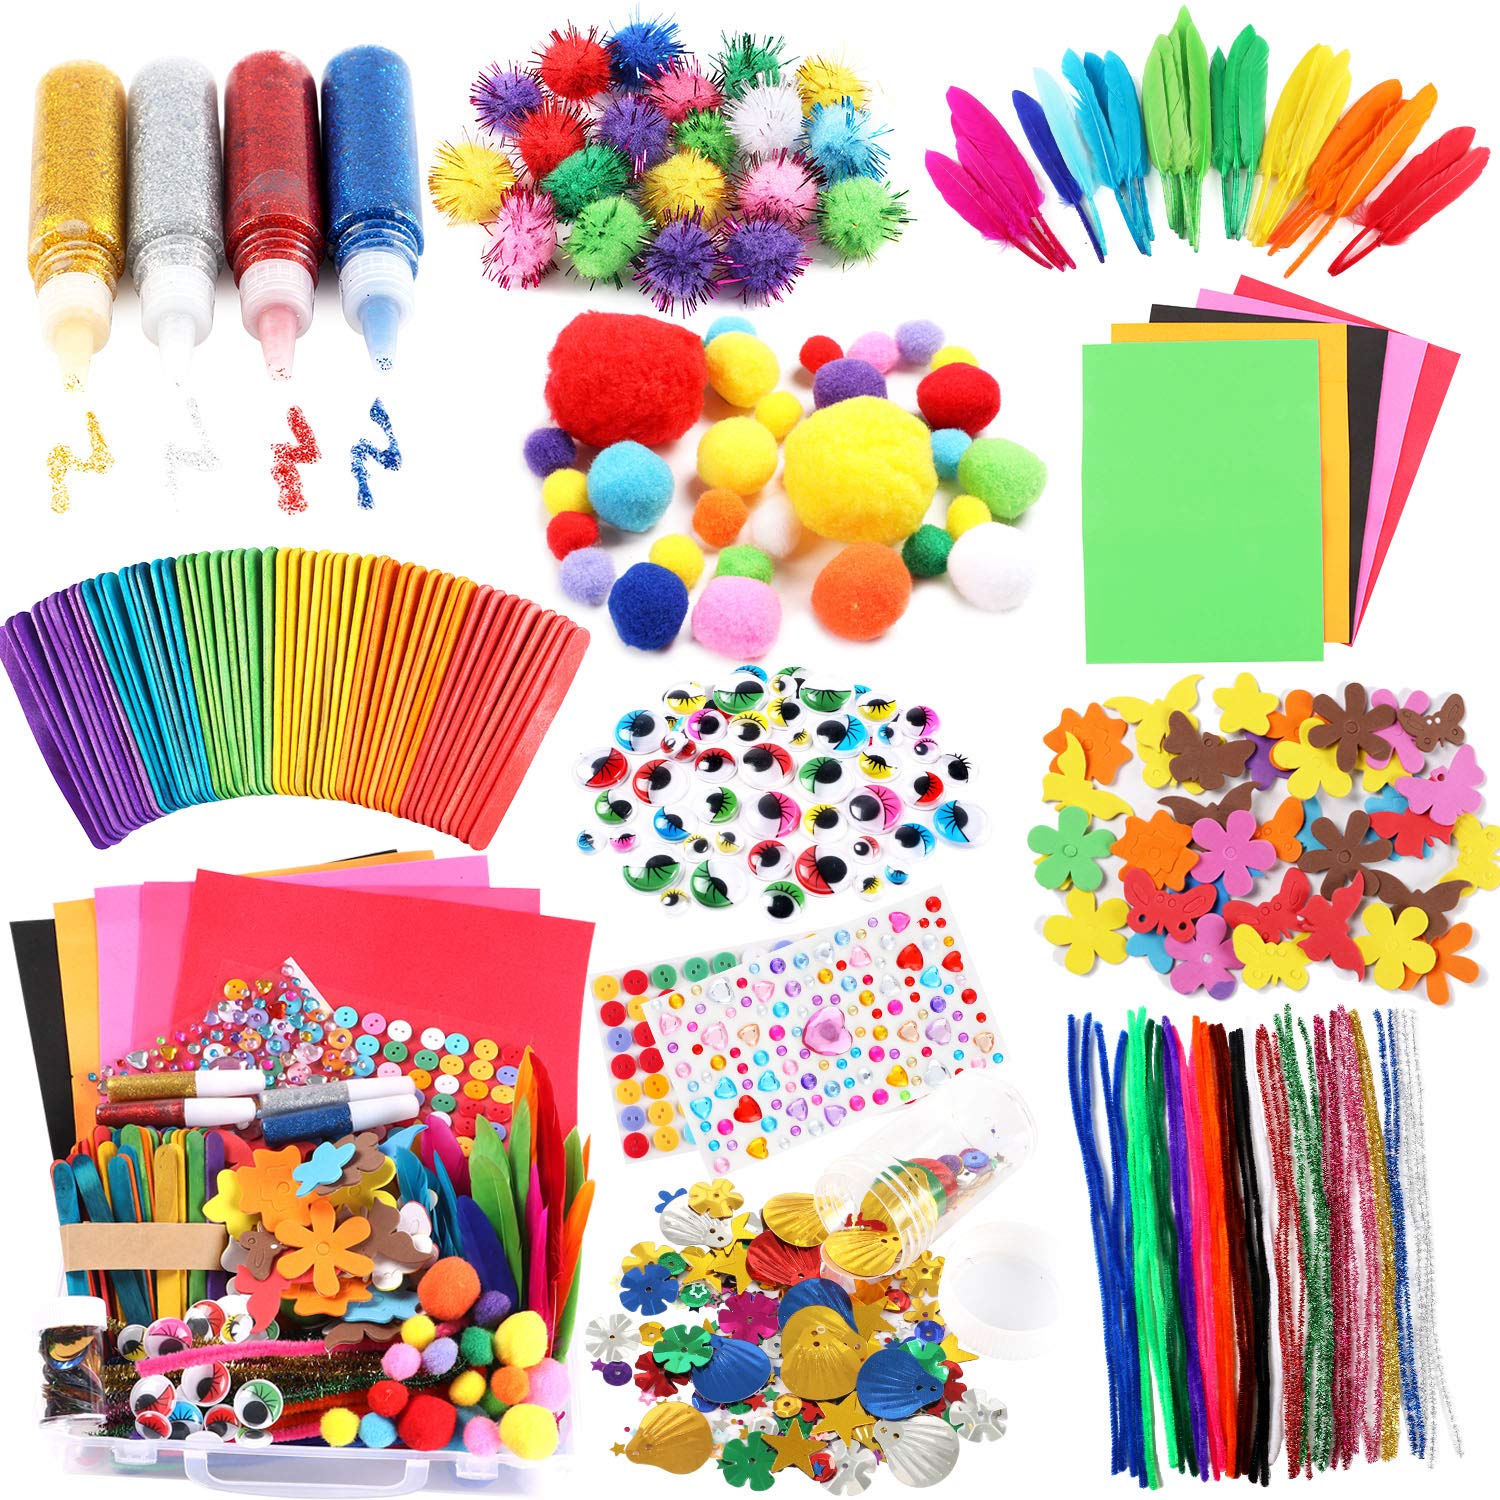 Large Art and Craft Supplies